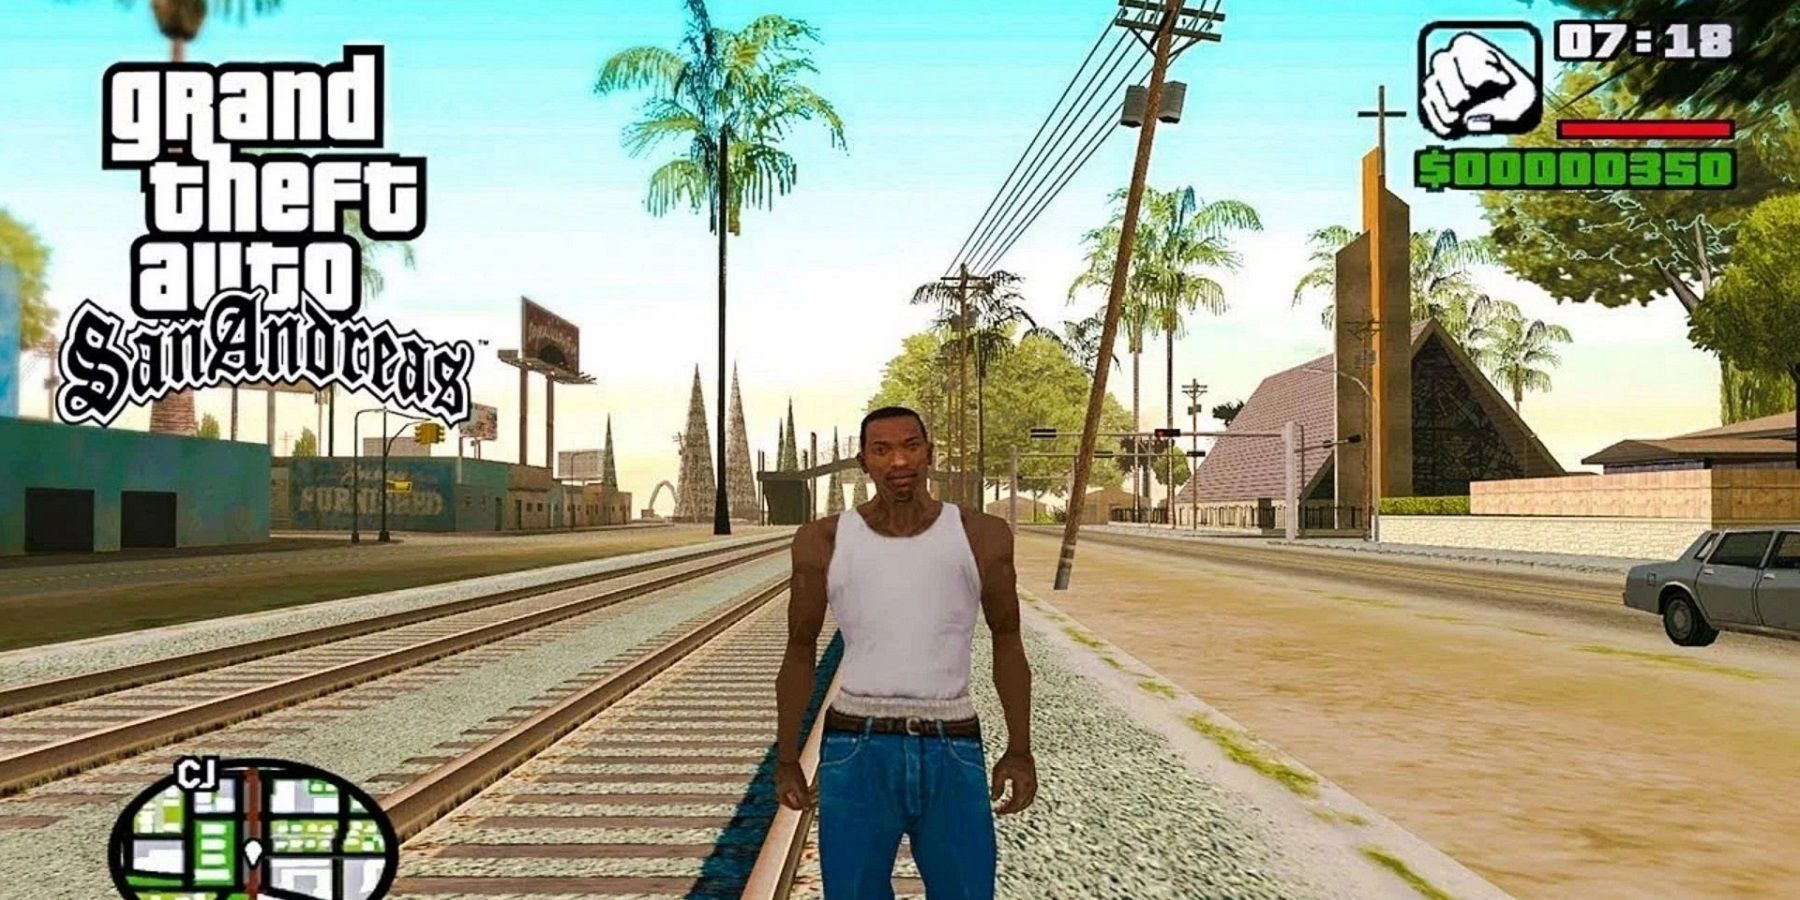 gta san andreas free download for pc full game